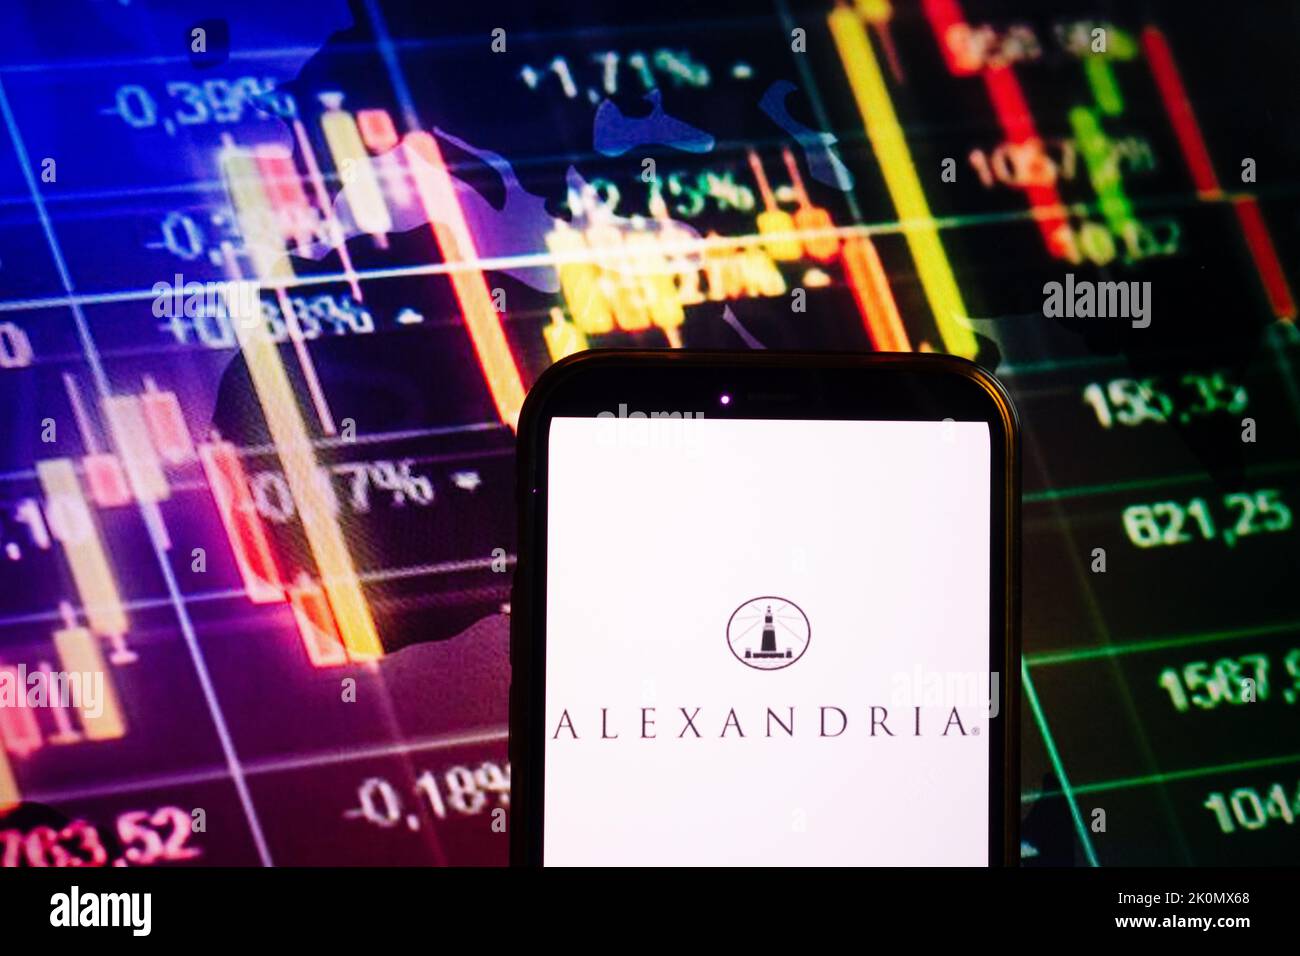 KONSKIE, POLAND - September 10, 2022: Smartphone displaying logo of Alexandria Real Estate Equities company on stock exchange diagram background Stock Photo